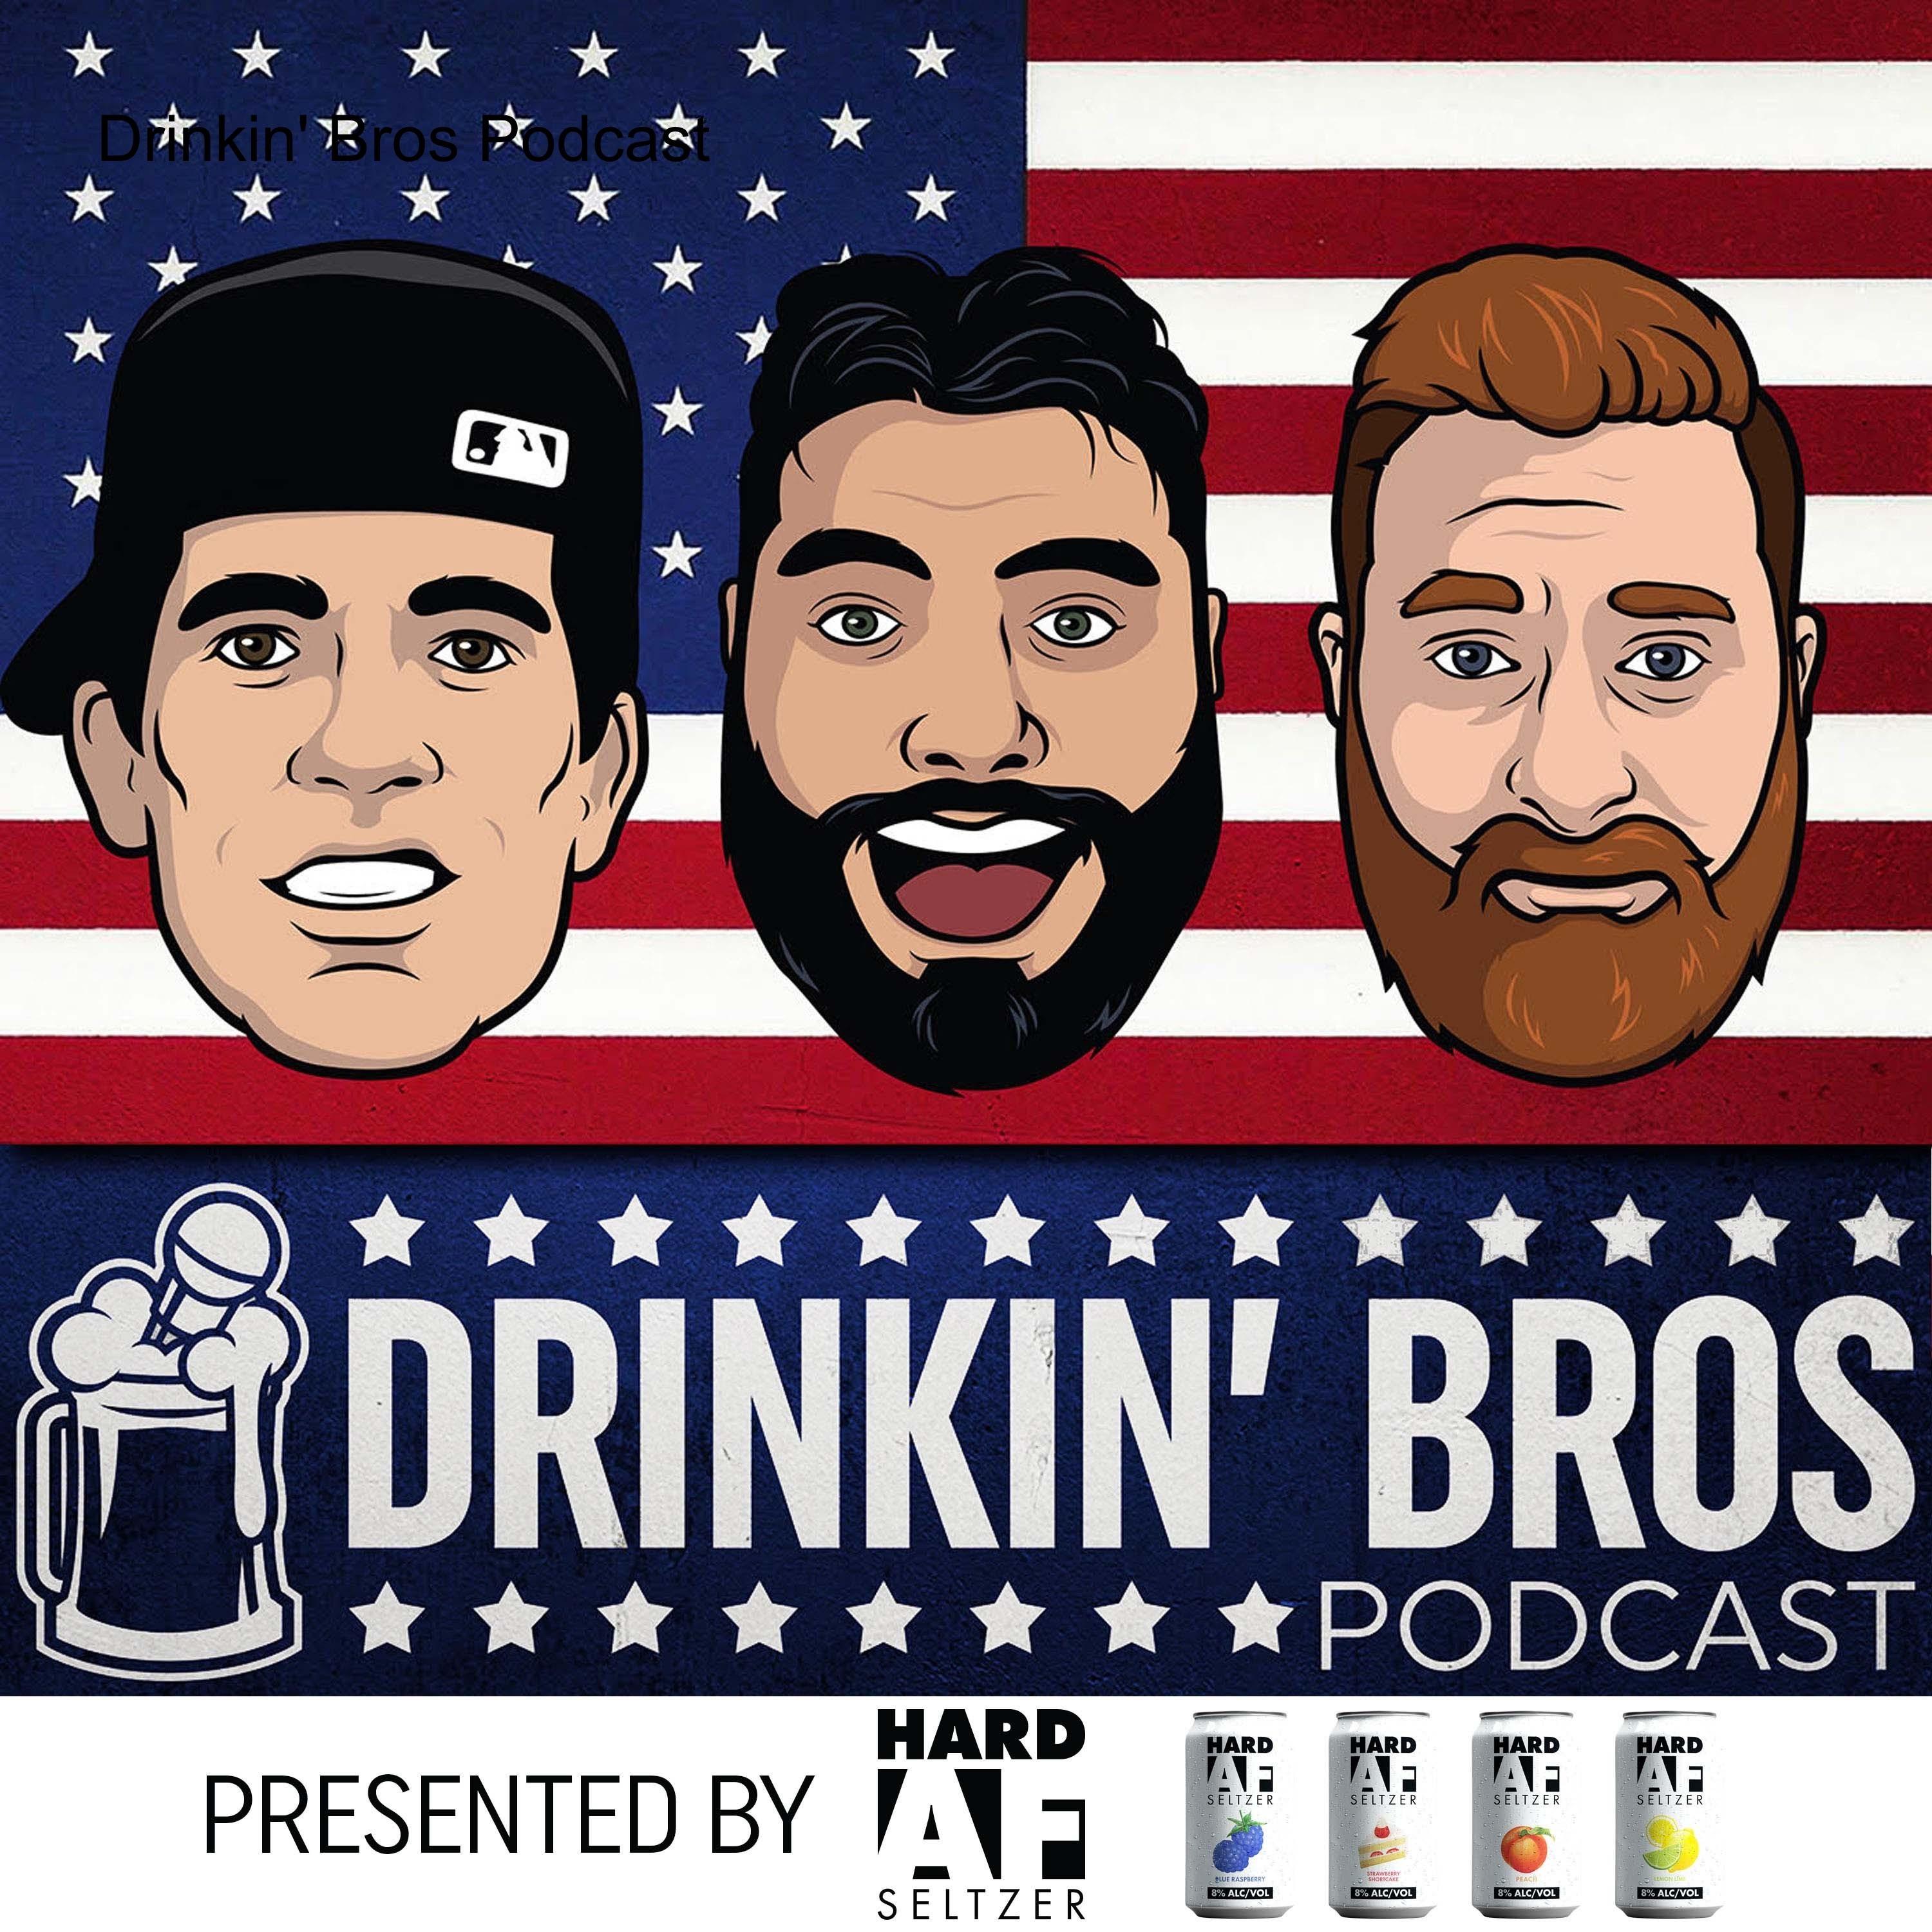 Muslim Very Big Chuche And Bums Xxx Video - Drinkin' Bros Podcast | RedCircle